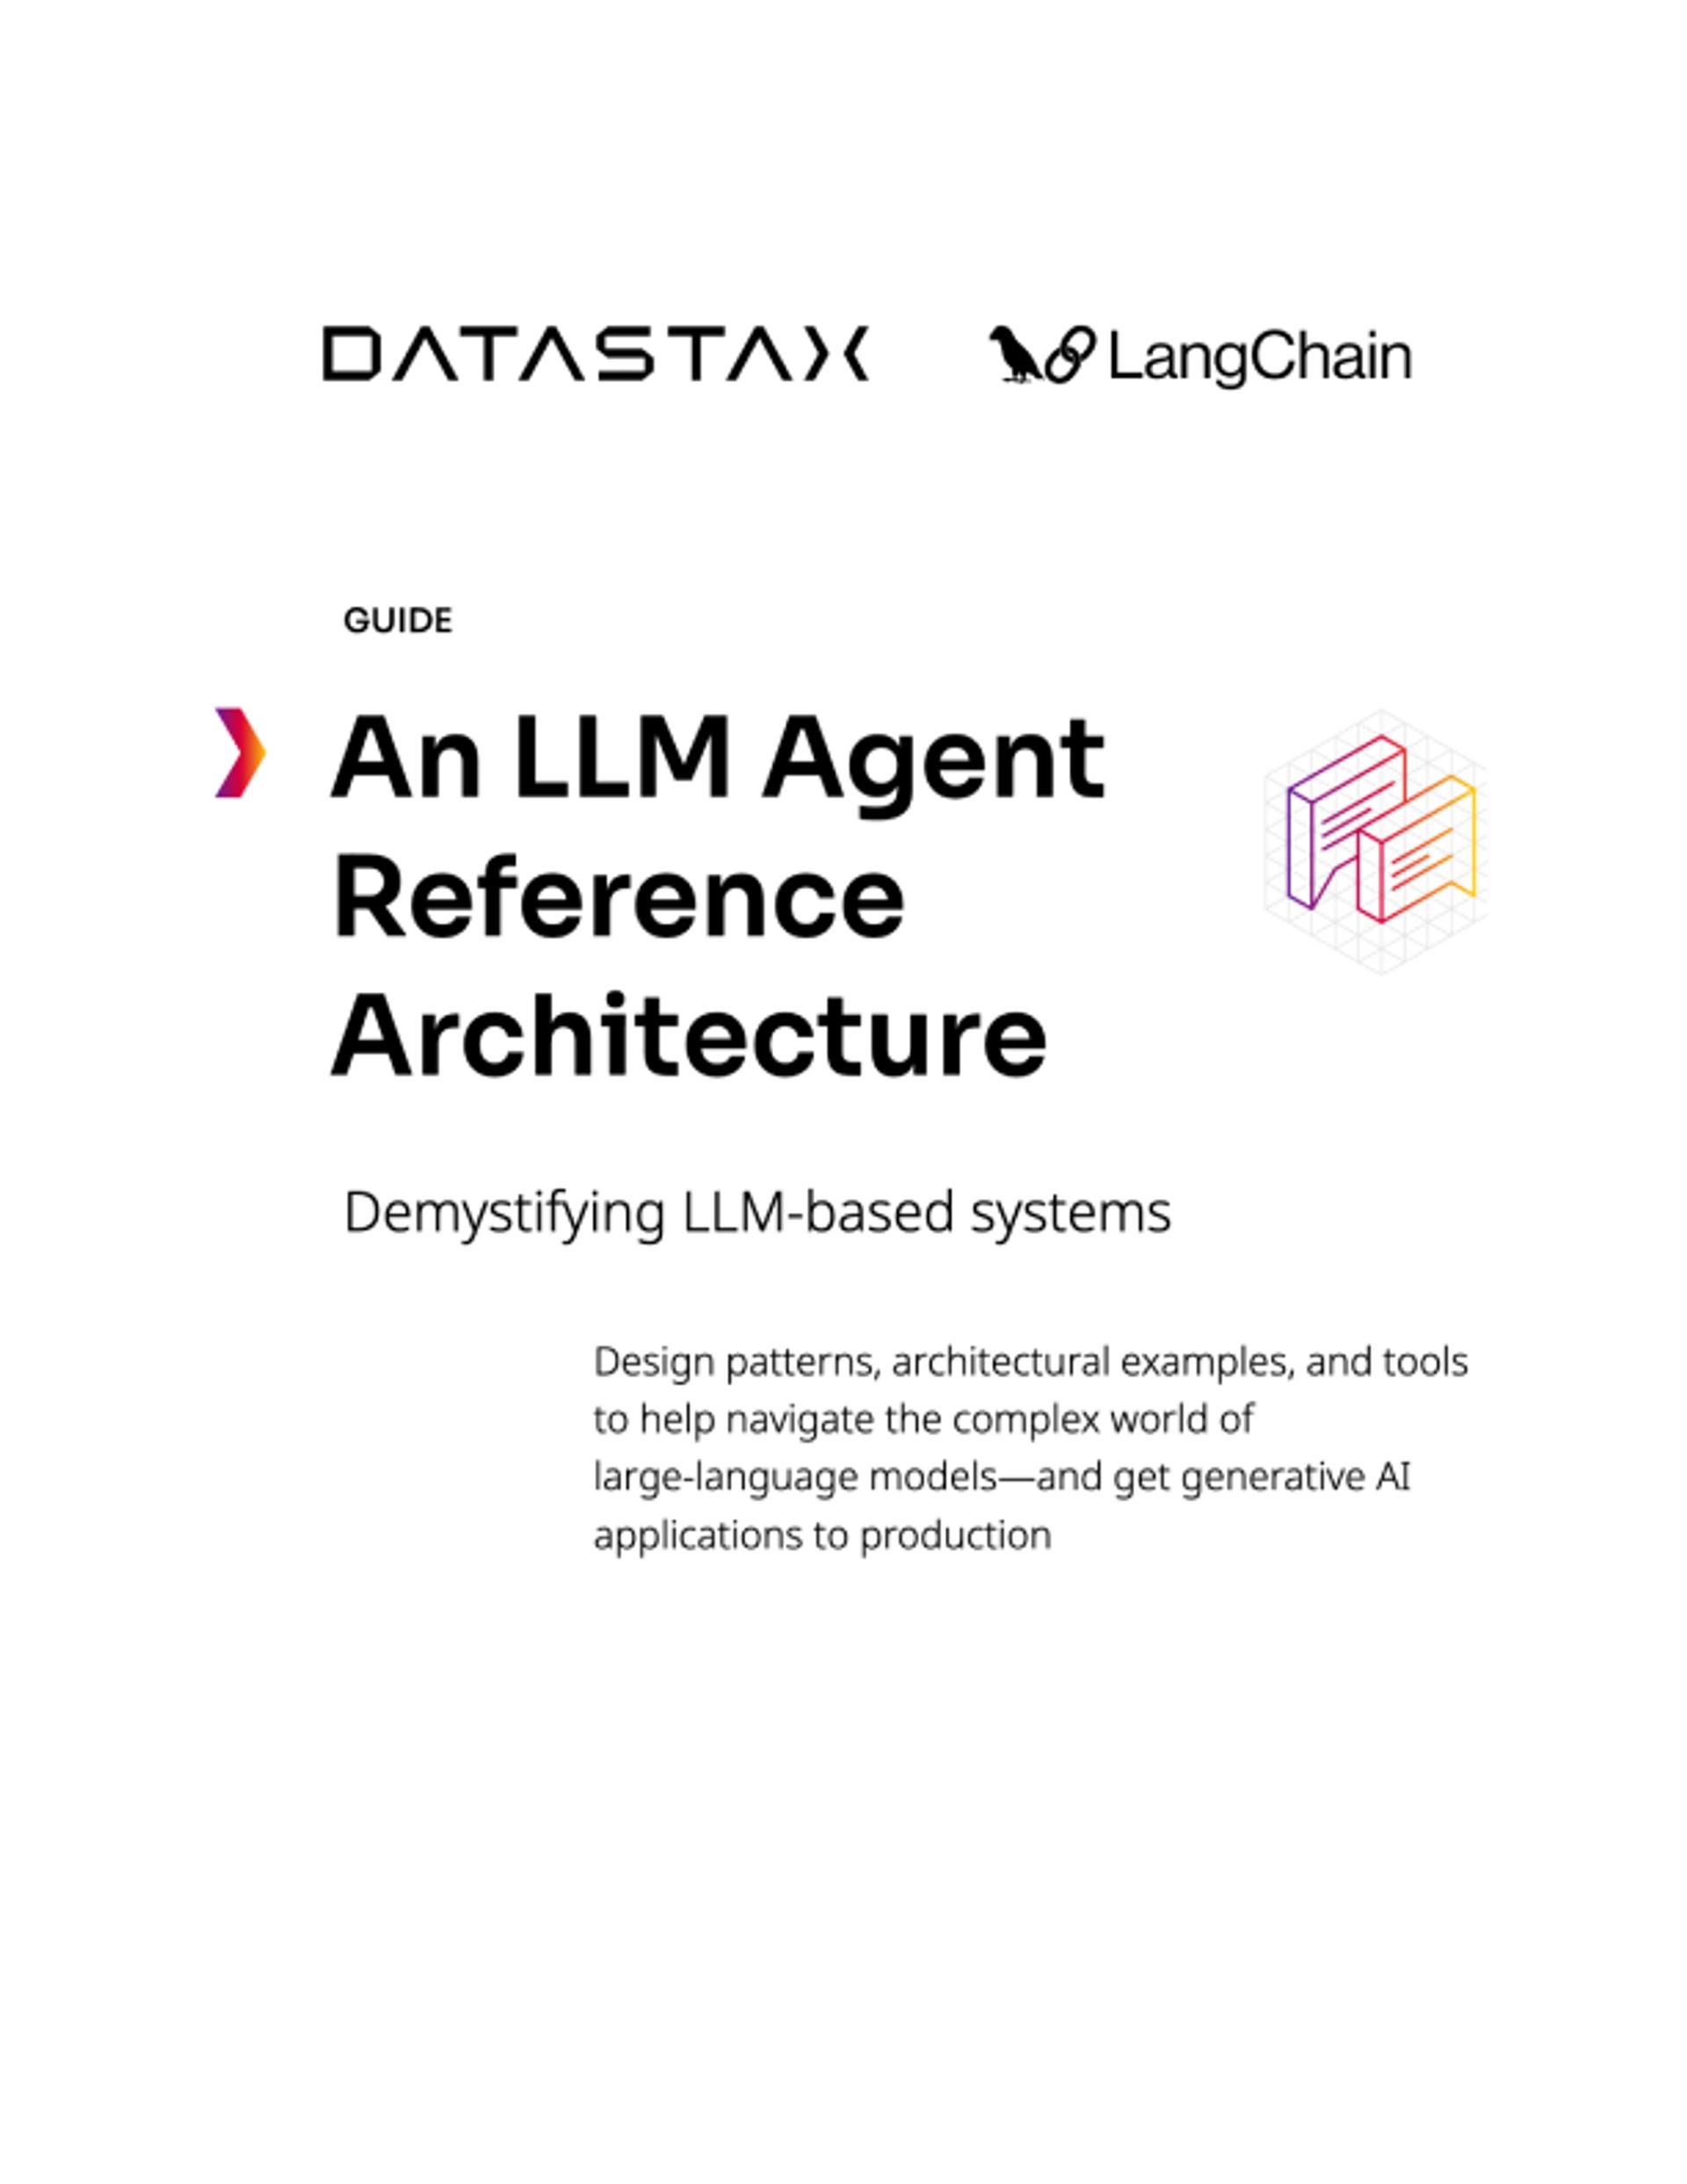 An LLM Agent Reference Architecture: Demystifying LLM-based Systems